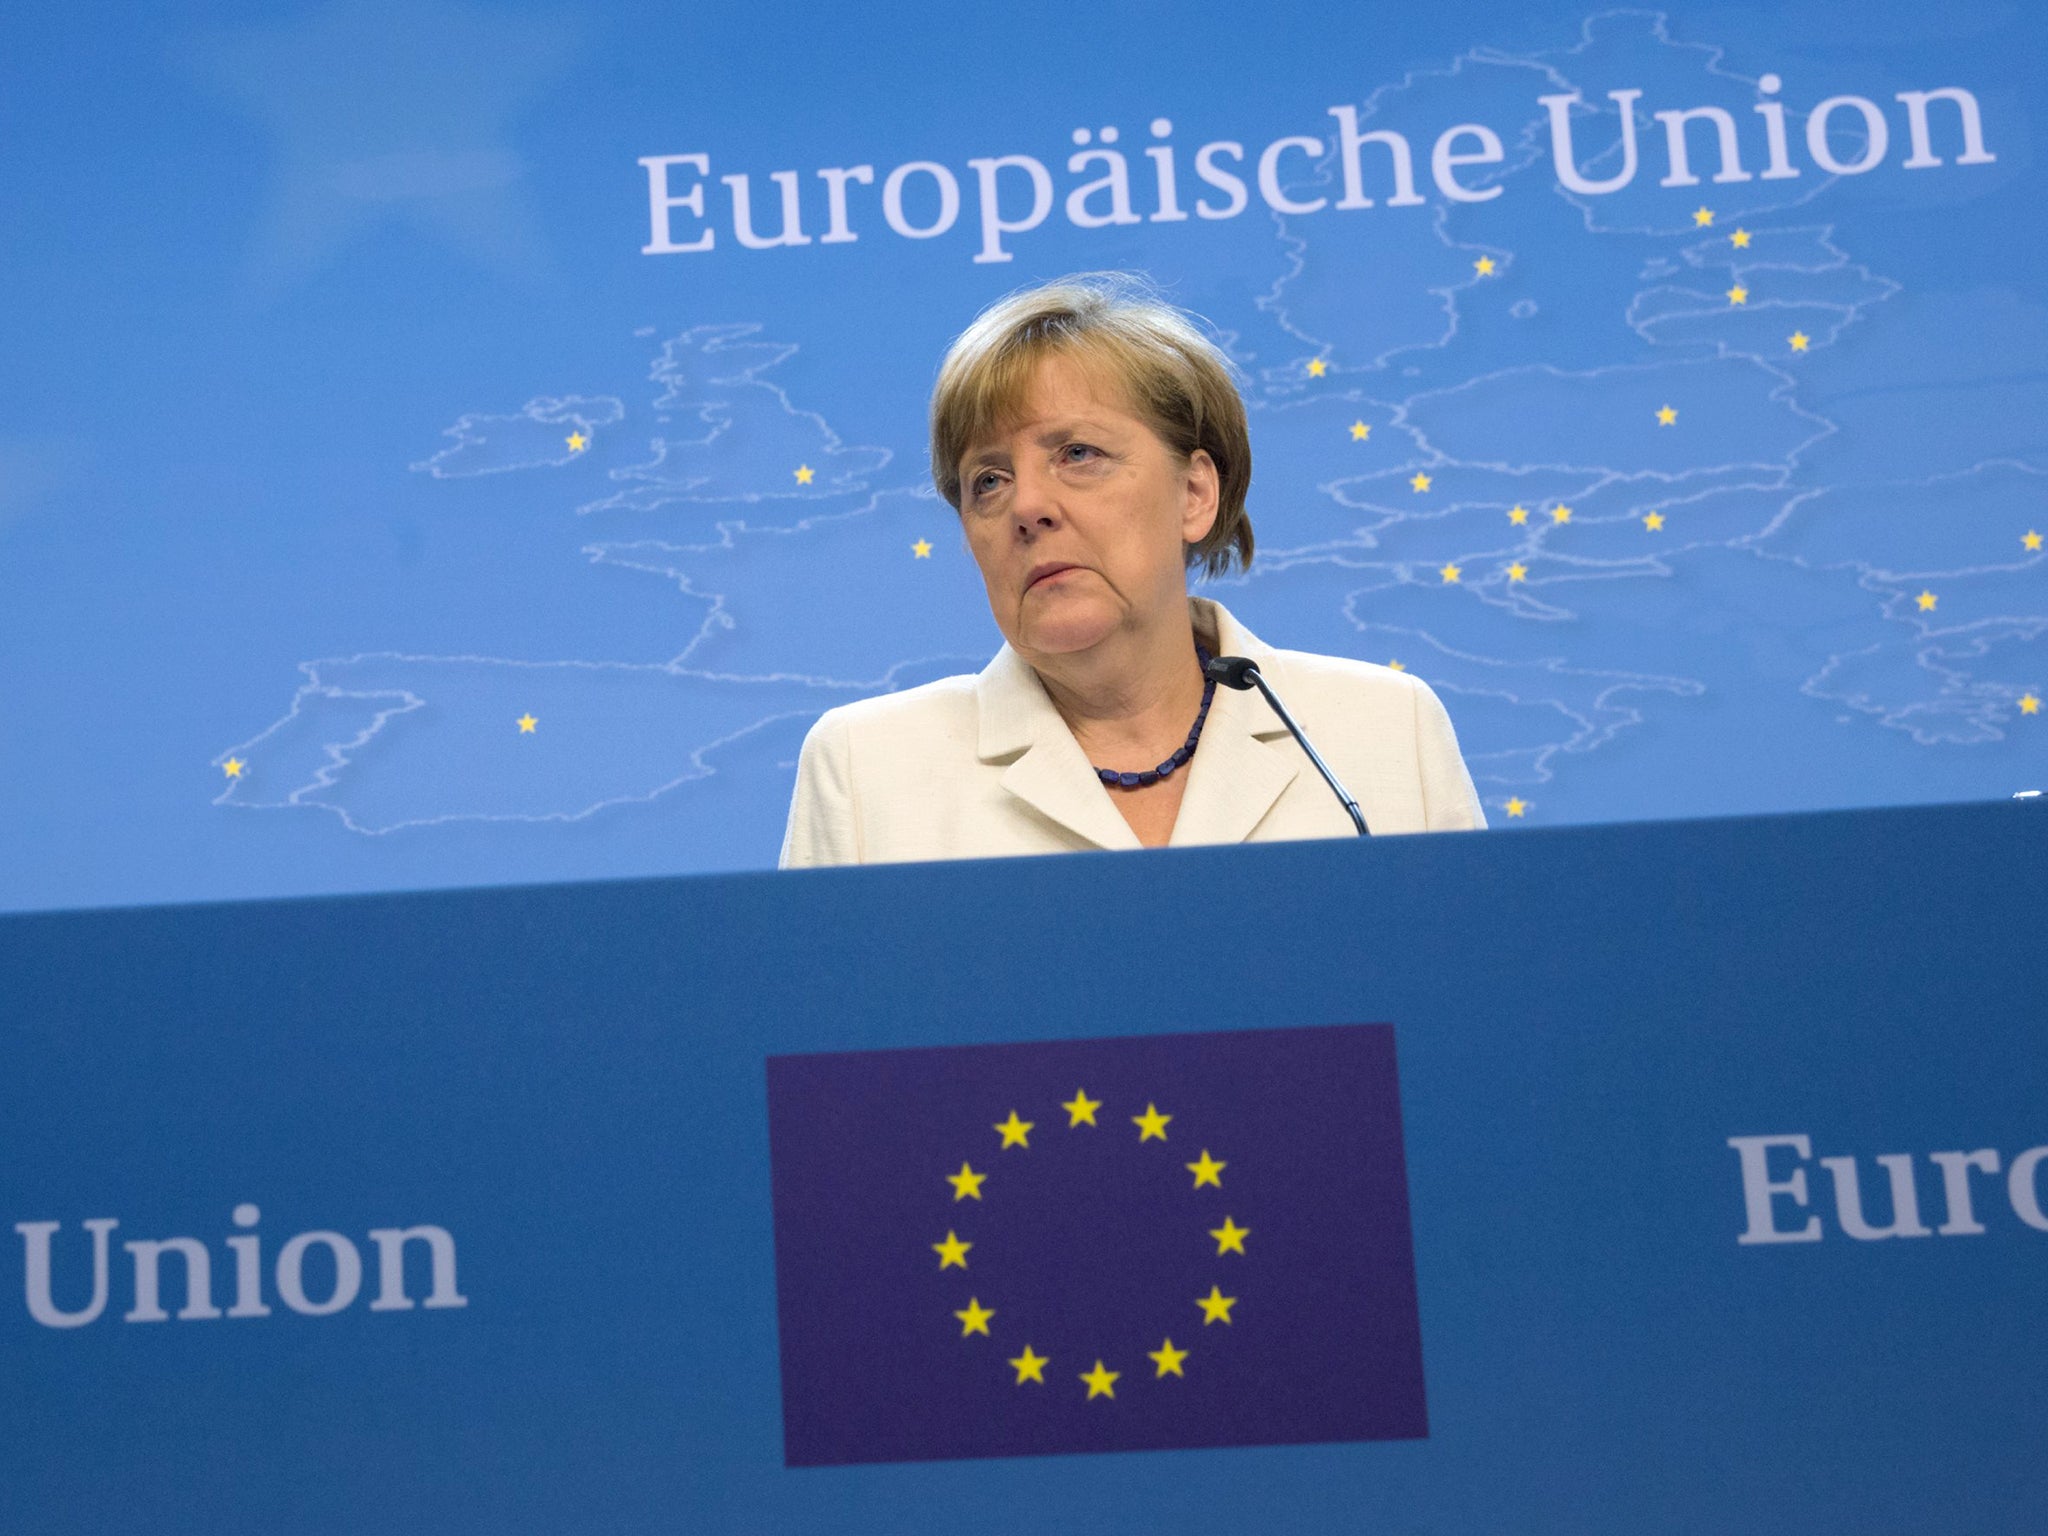 German Chancellor Angela Merkel speaks during a news conference at the end of a euro zone leaders summit in Brussels, Belgium